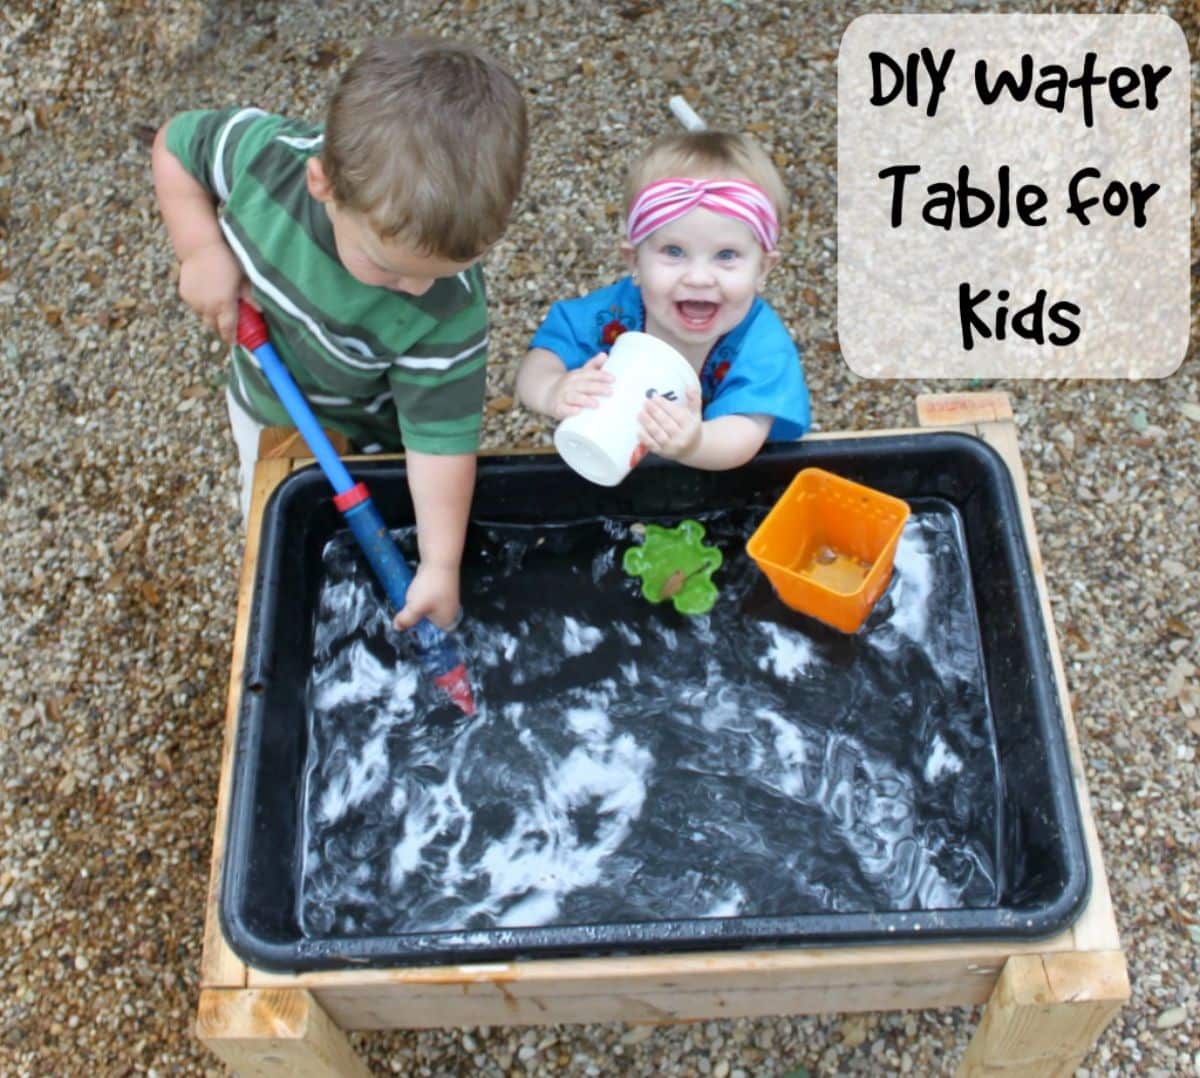 Two kids playing next to a water table outdoor.